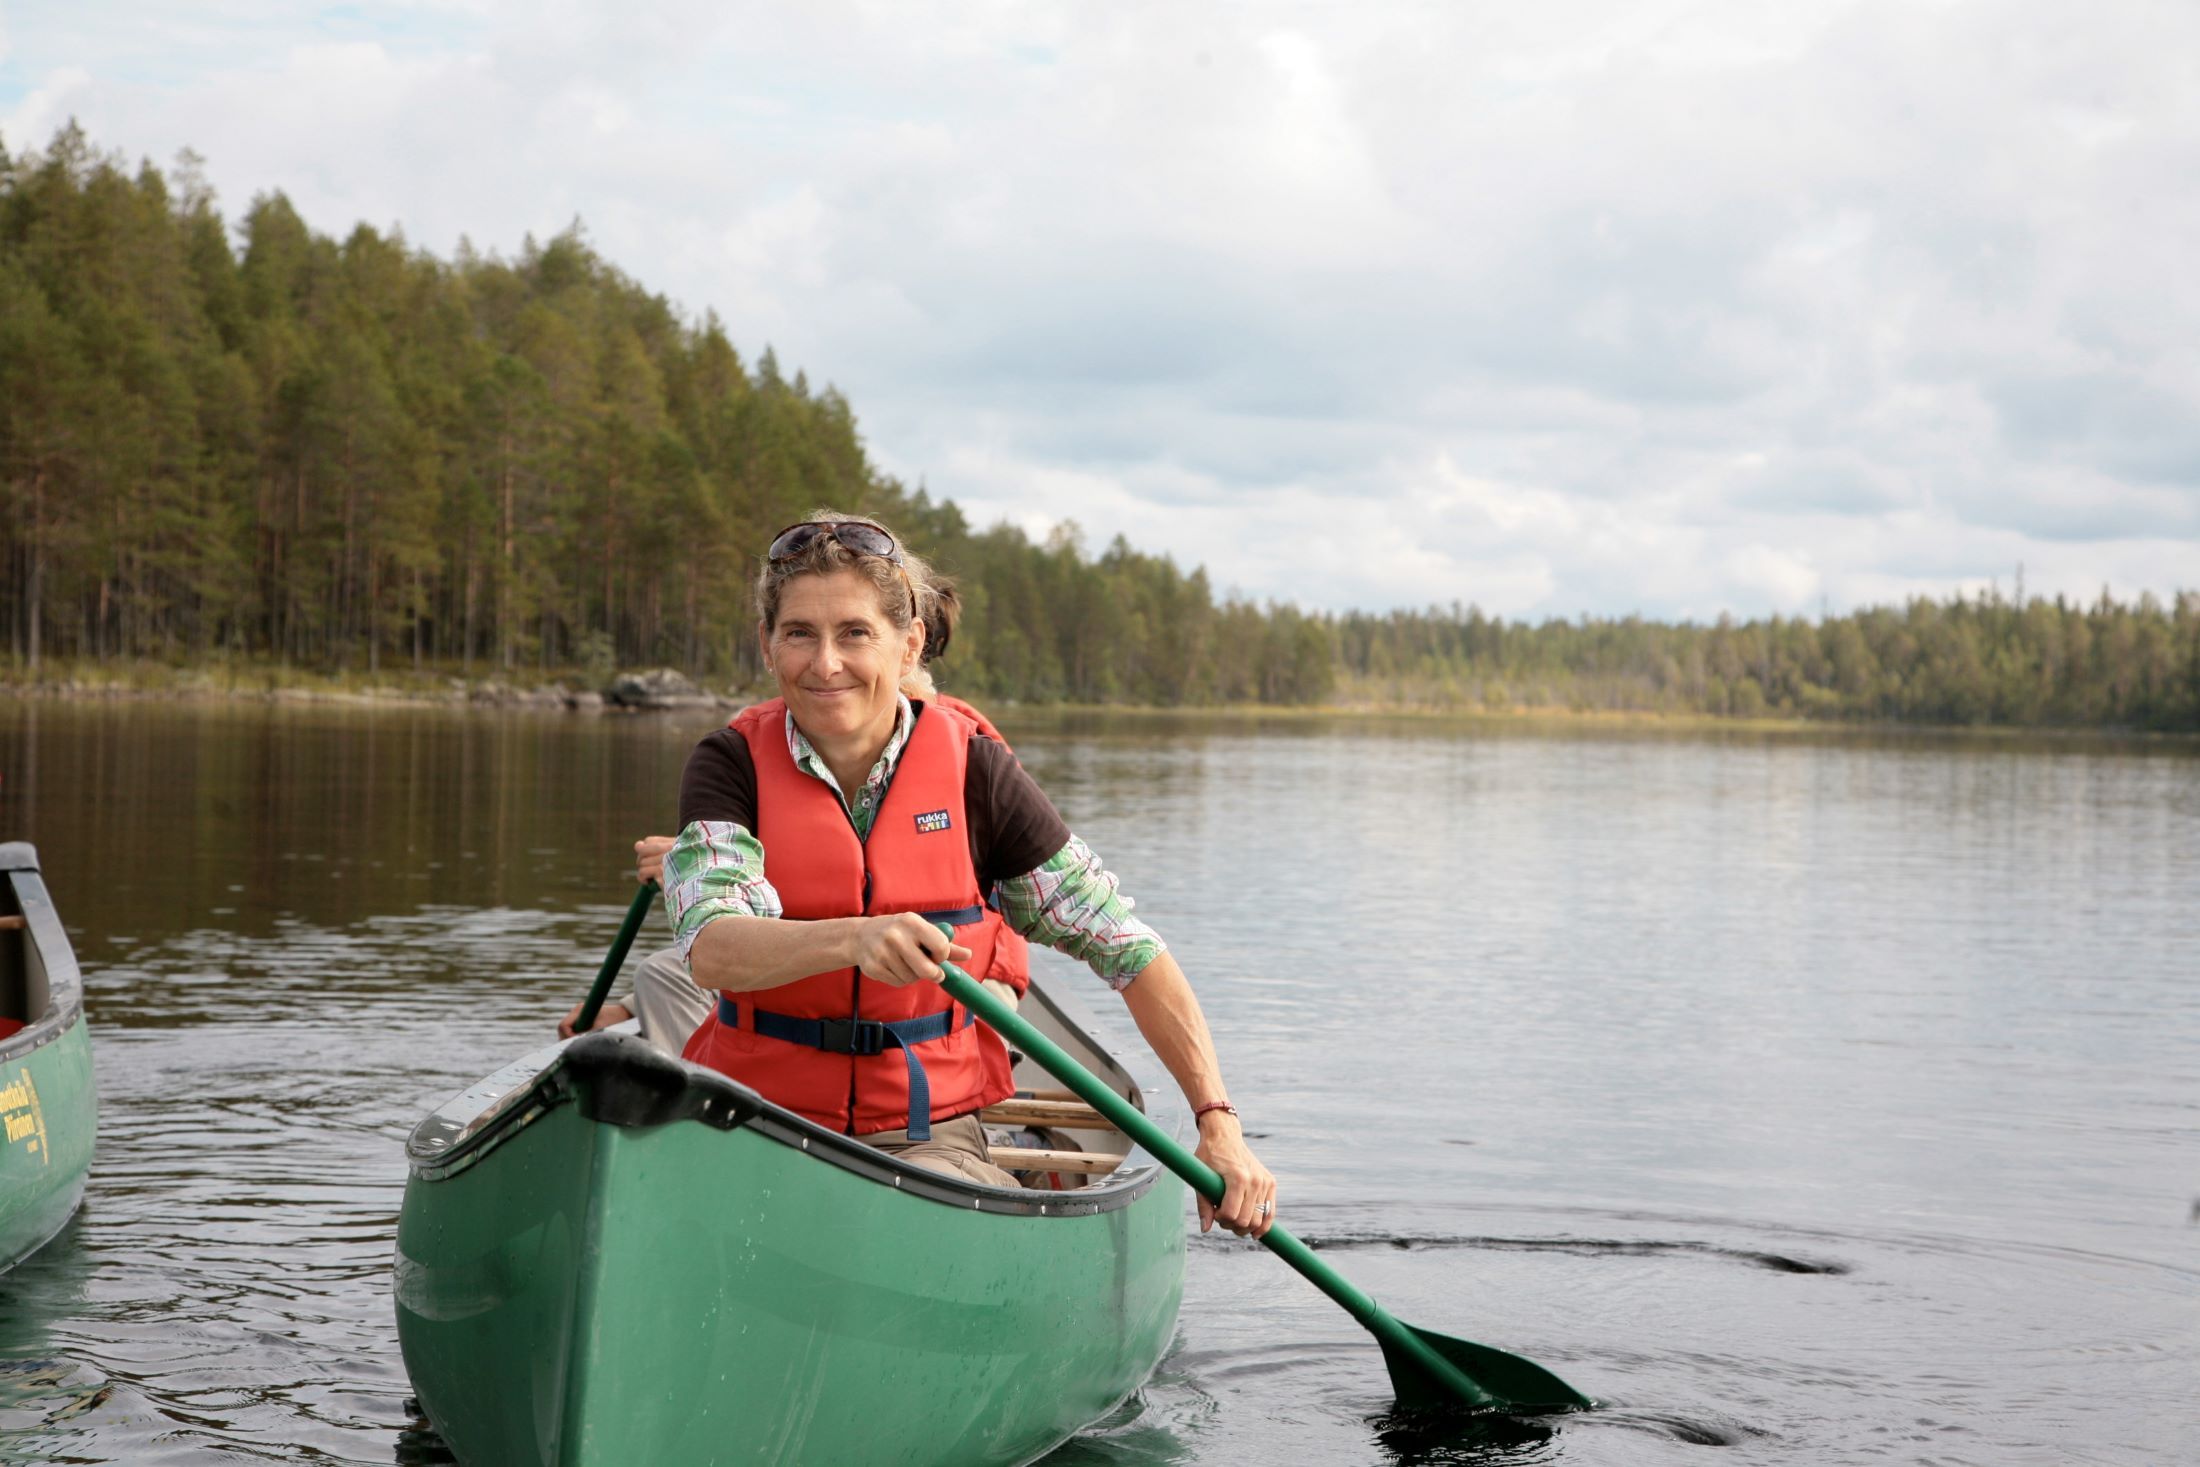 A woman canoeing on a calm lake